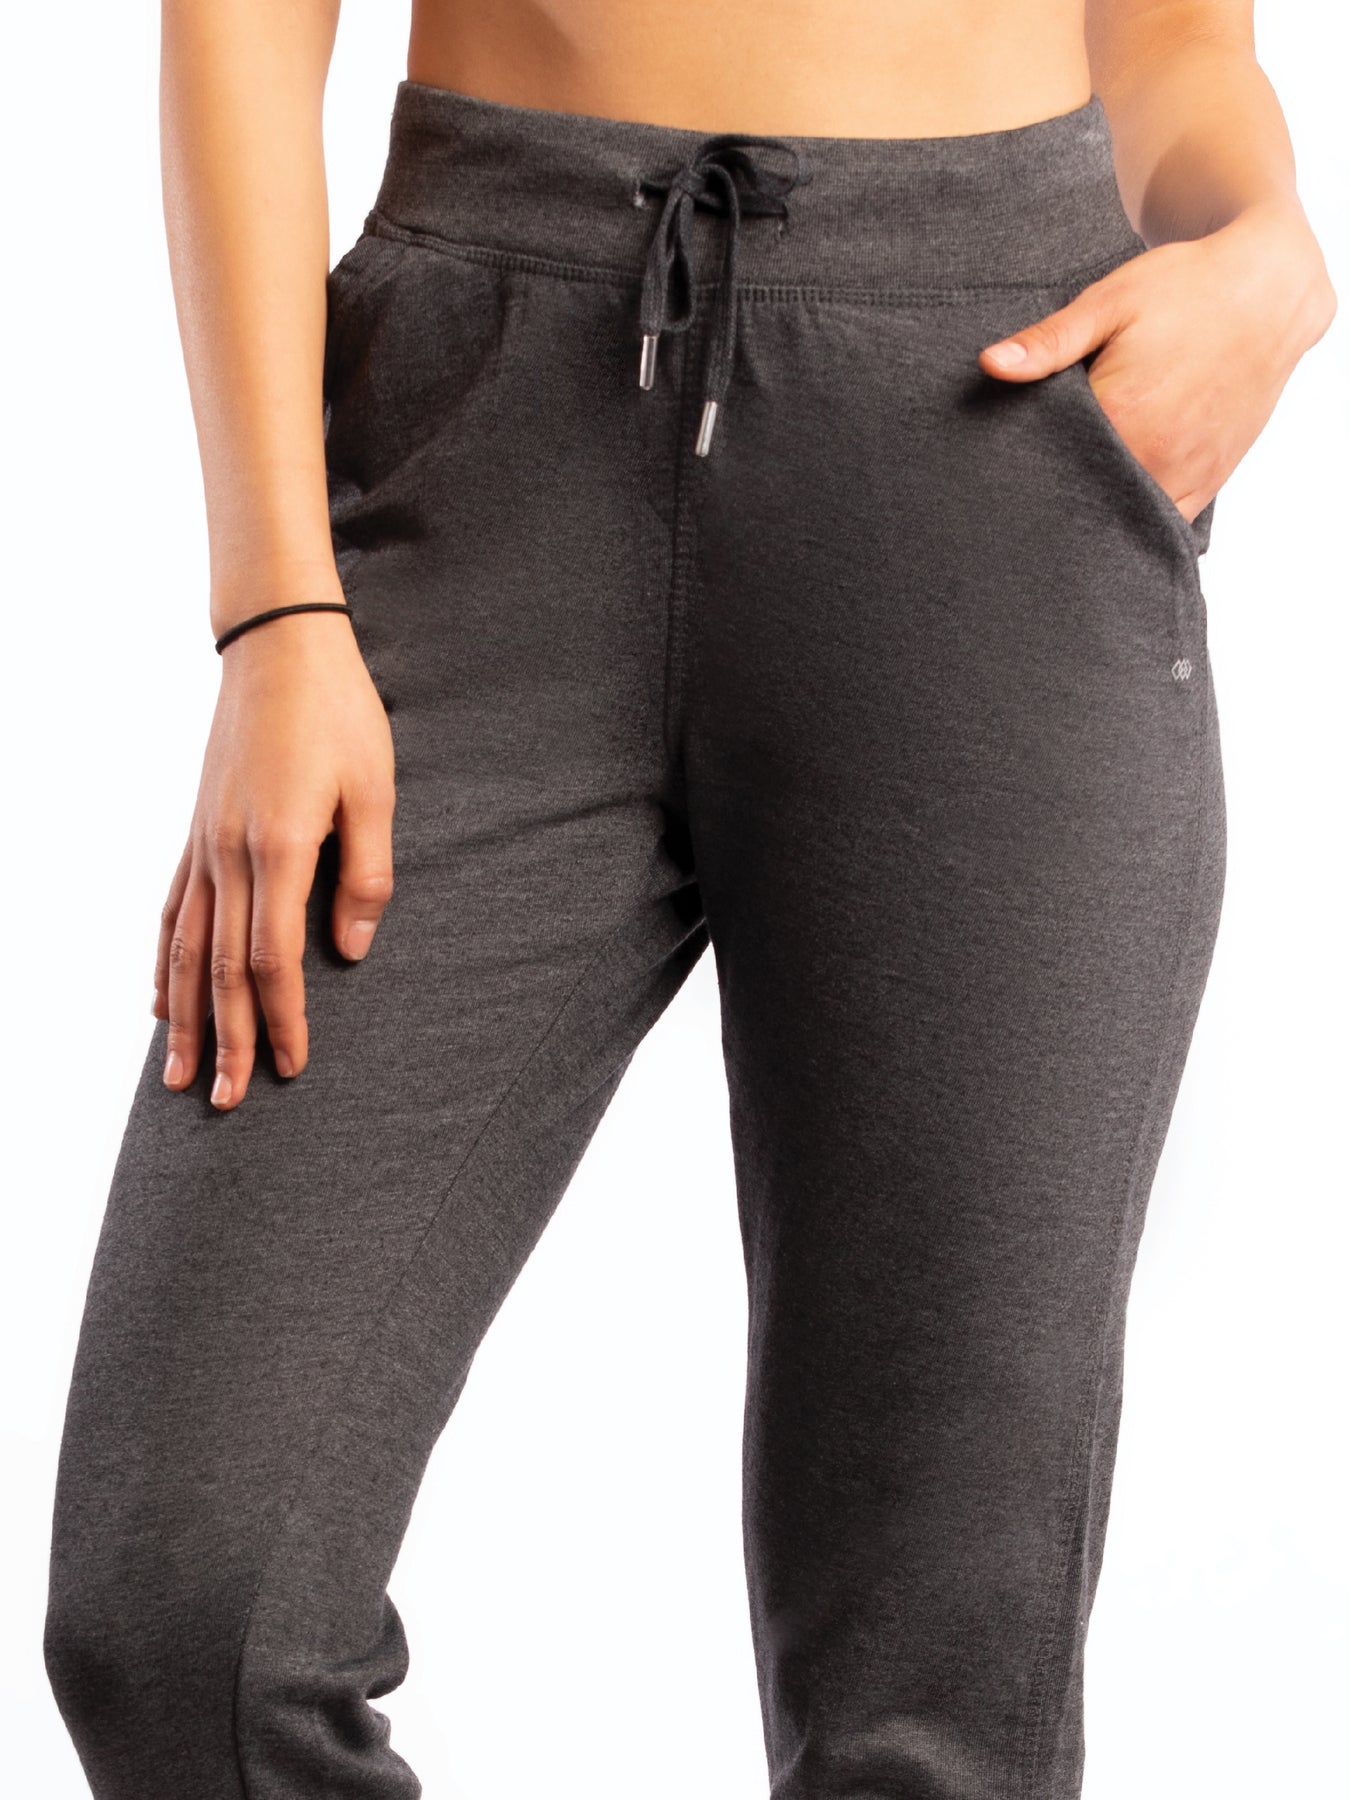 Livfree Women's Solid Lower With Pockets-5% Milange Grey